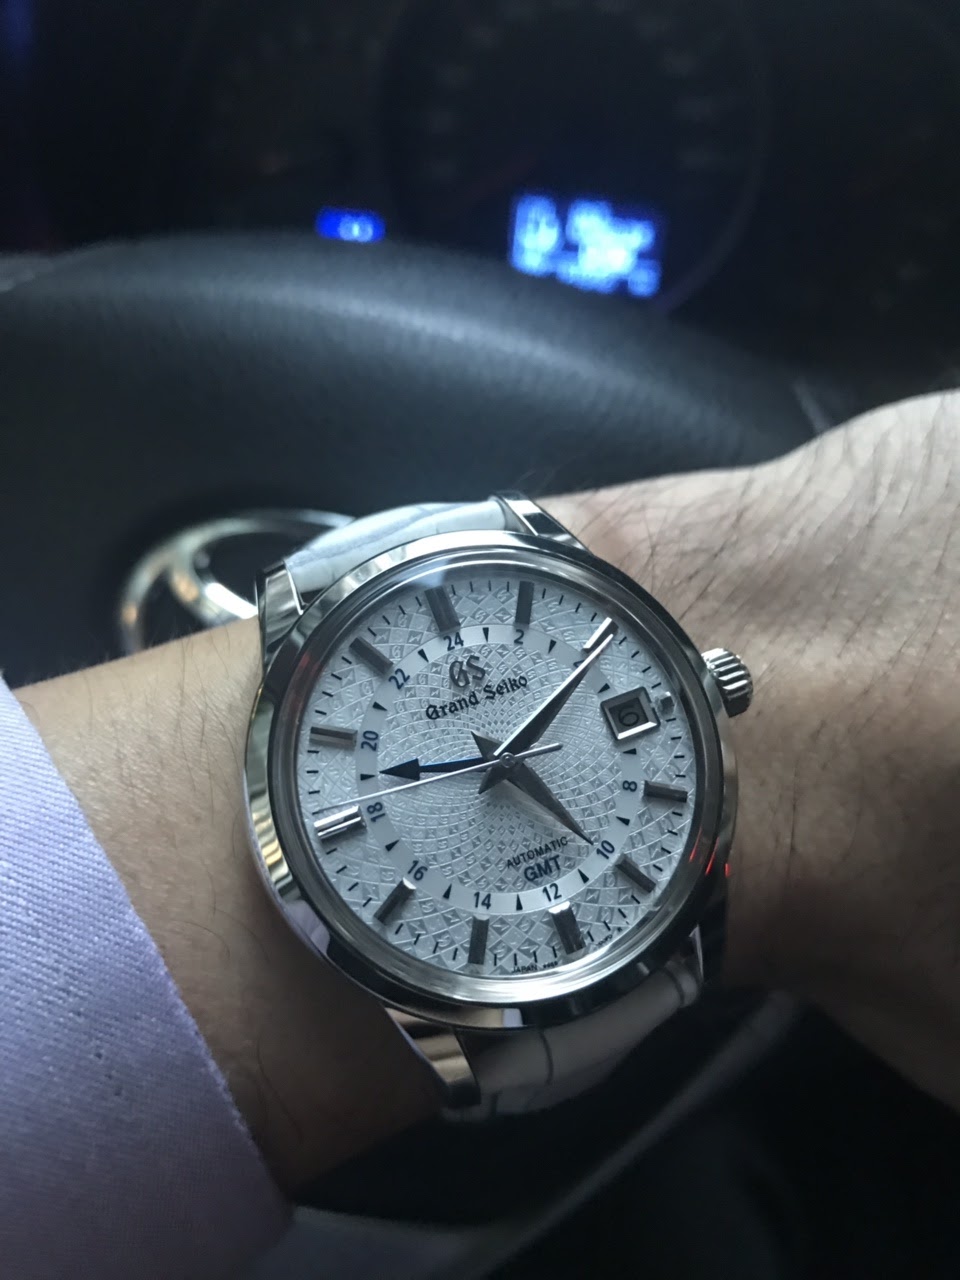 Seiko - Trying this Grand Seiko SBGM235 GMT and love it!